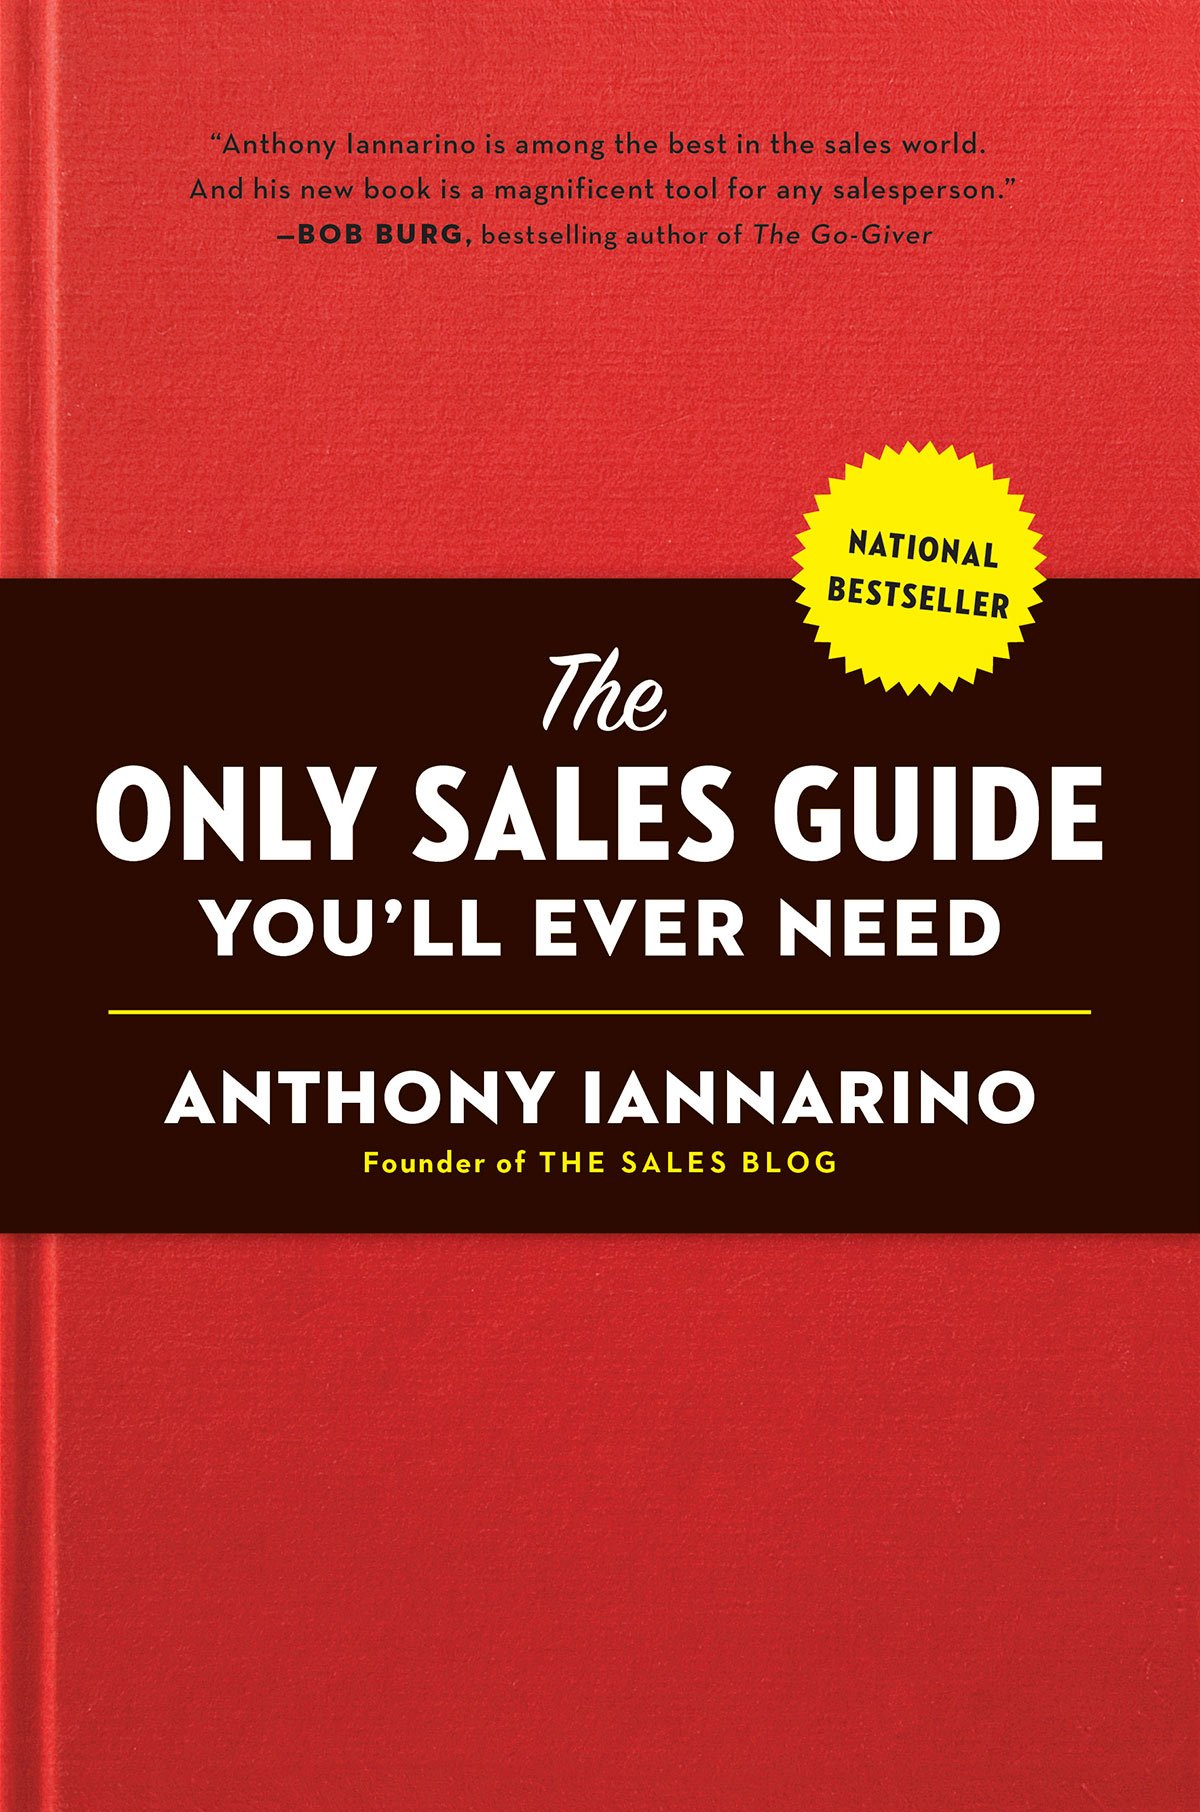 The Only Sales Guide book cover